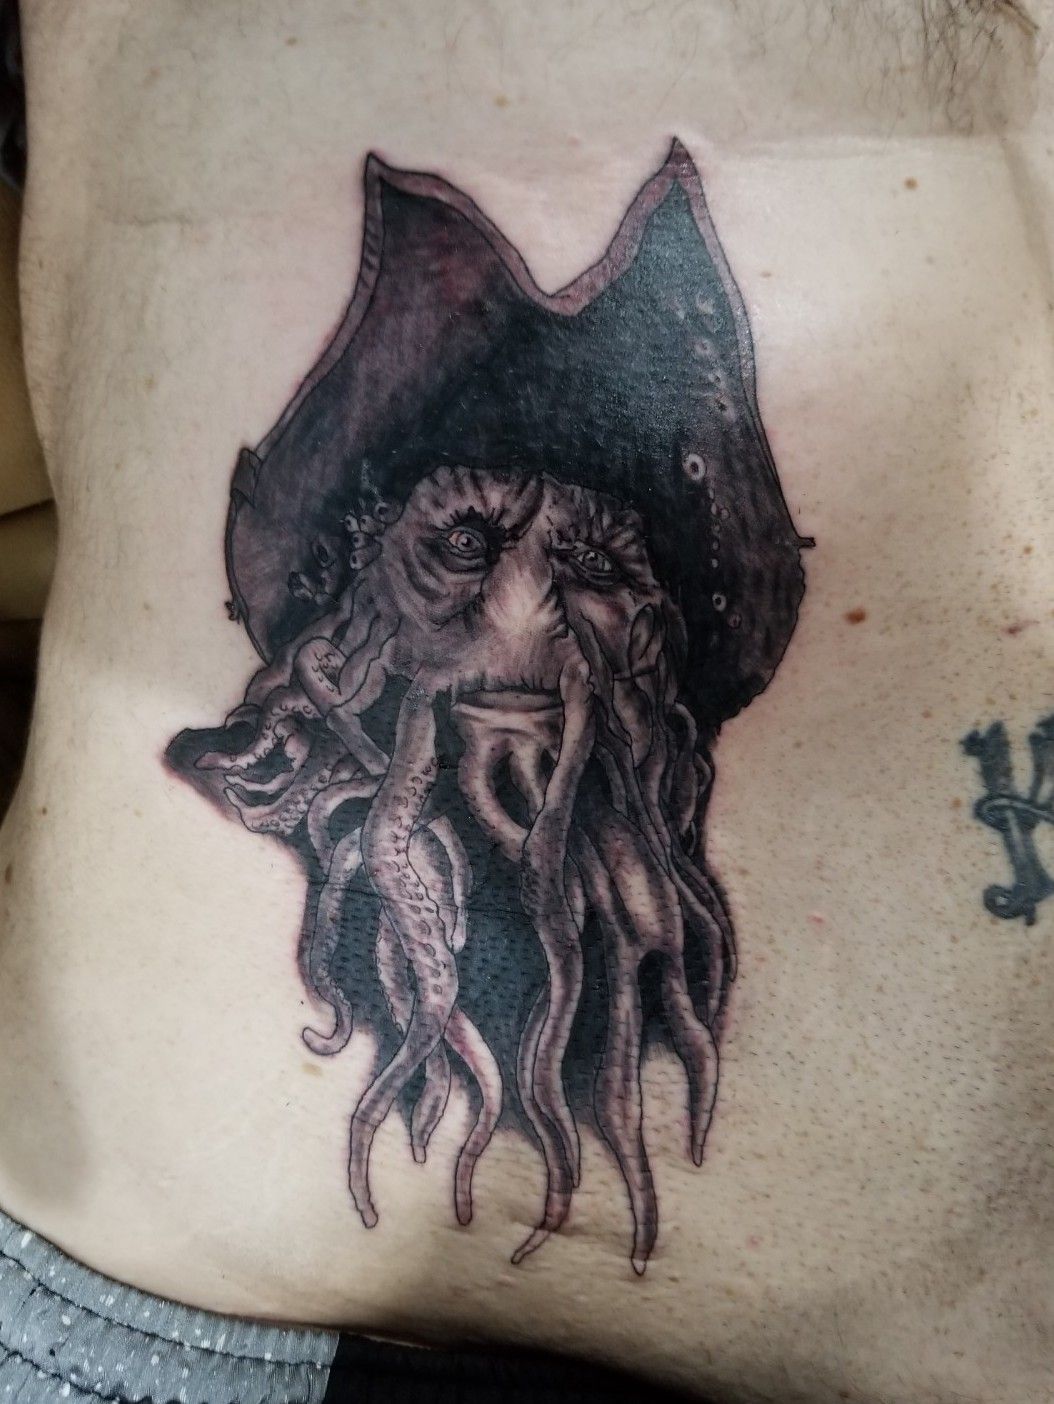 DM Tattoo  Pirates of the Caribbean tattoo Loved to work on this one  Message me if youre looking for an  awesome movie inspired  blackgrey  original tattoo  Facebook